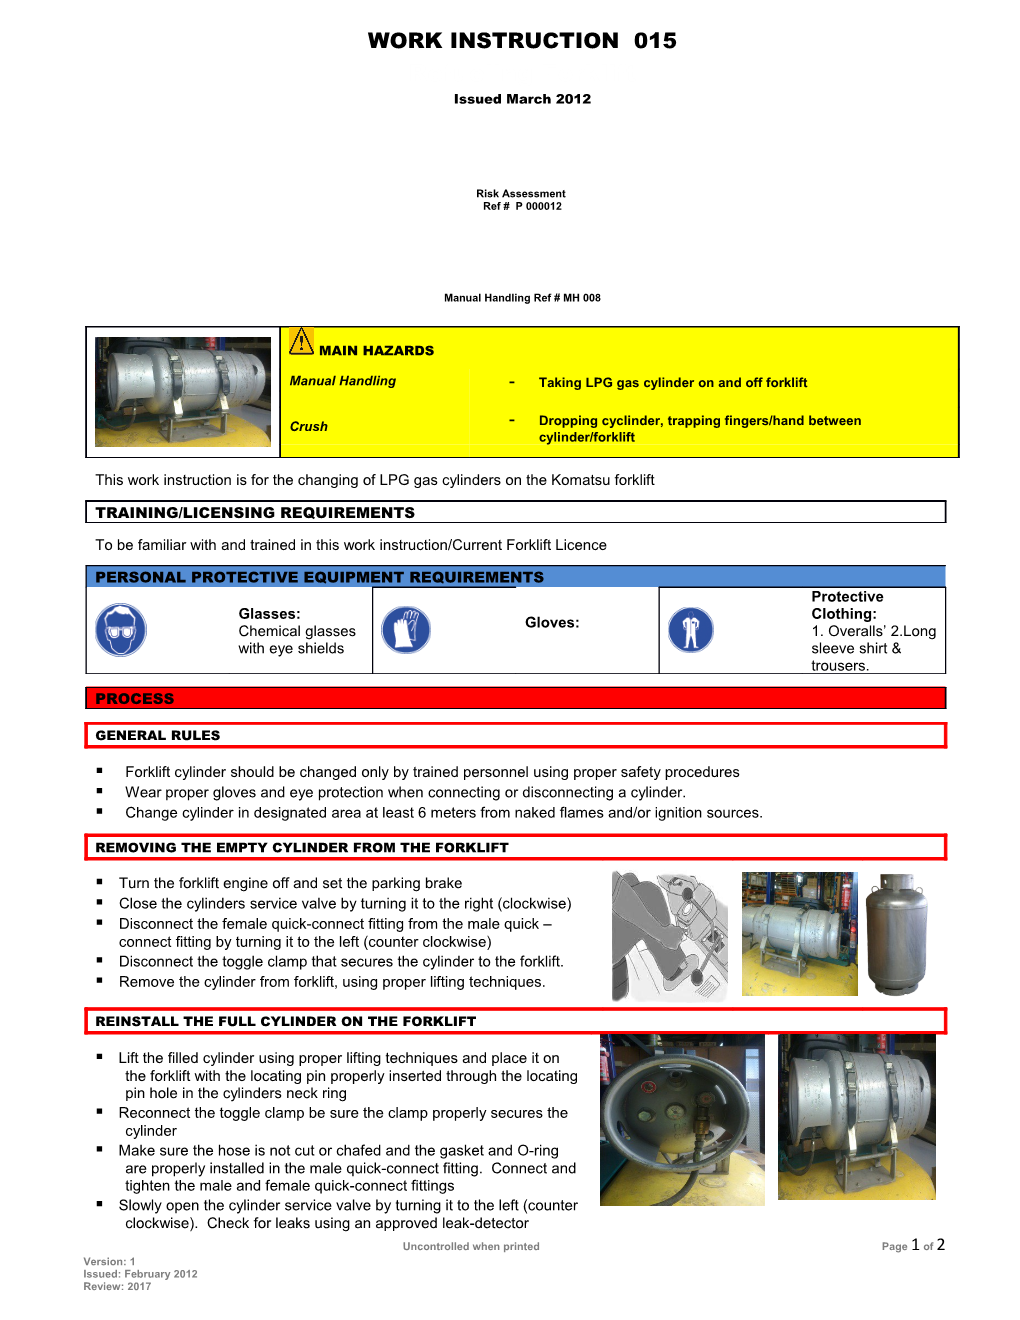 This Work Instruction Is for Thechanging of LPG Gas Cylinders on the Komatsu Forklift